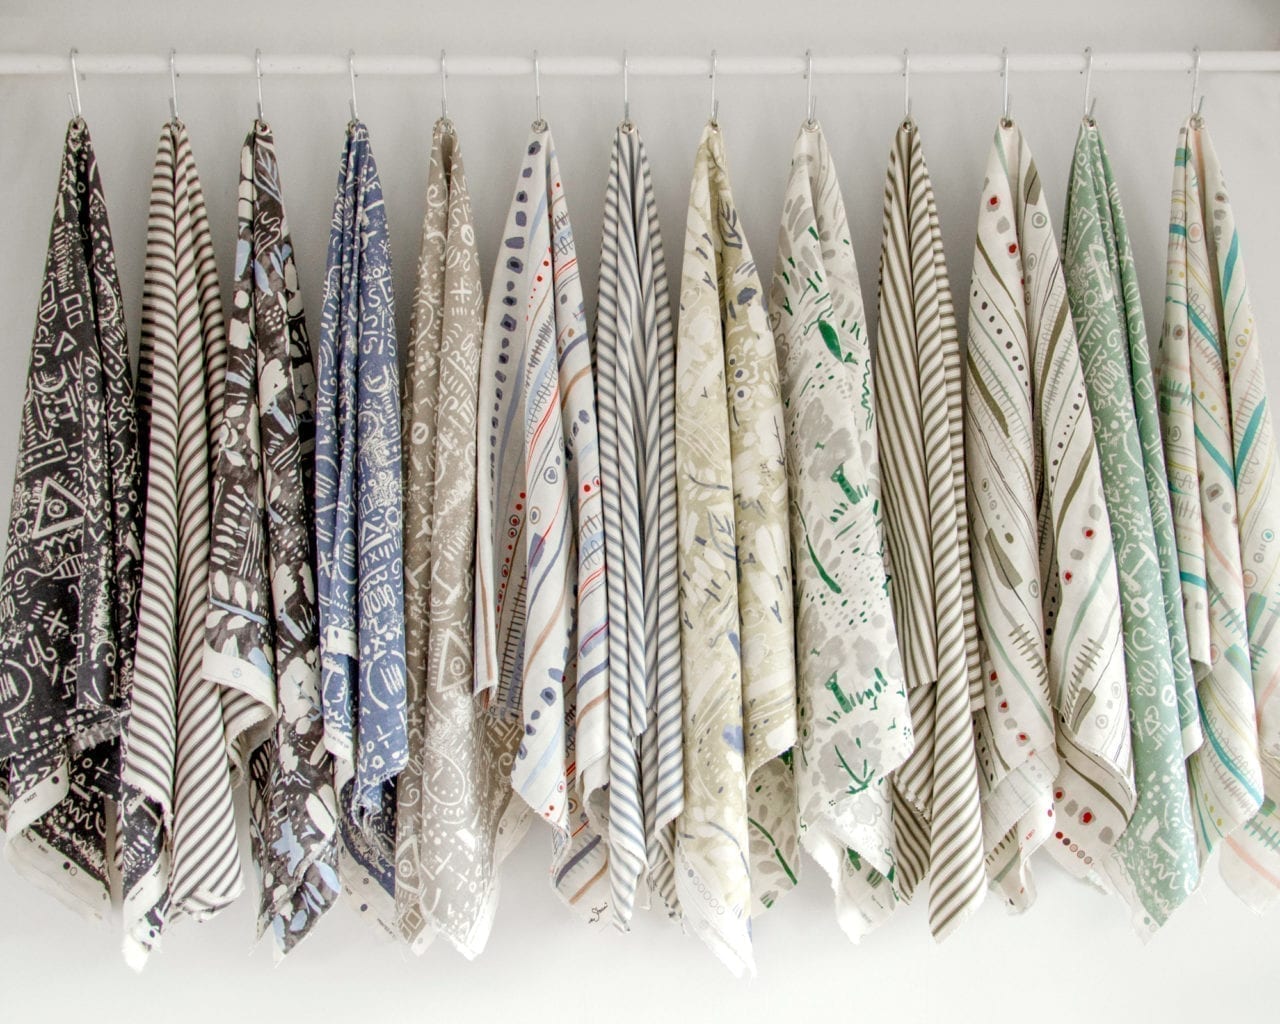 Ticking and Print fabrics by Annie Sloan hung up